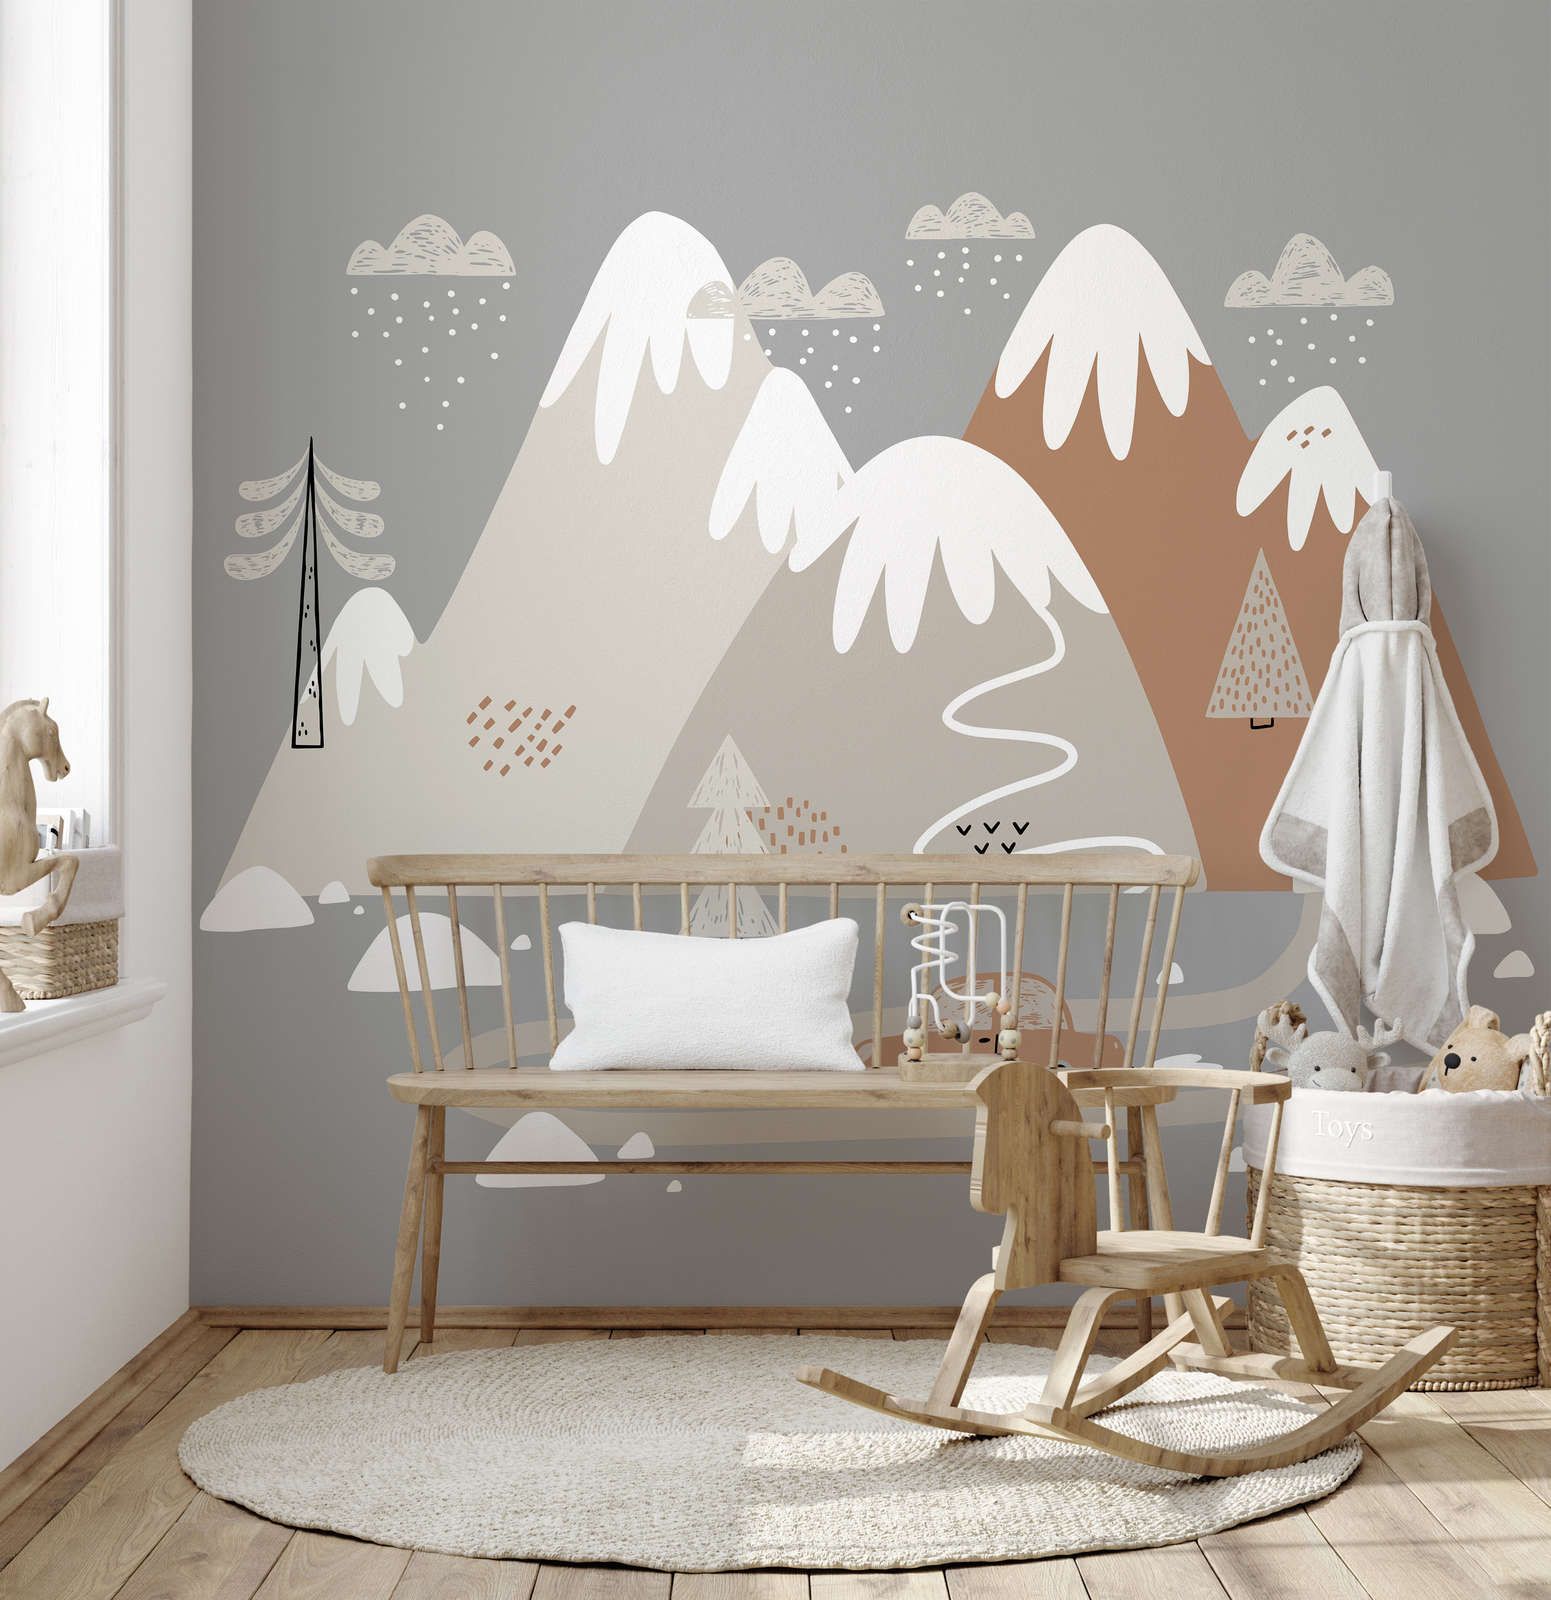             Photo wallpaper snowy hills with small house - Smooth & matt non-woven
        